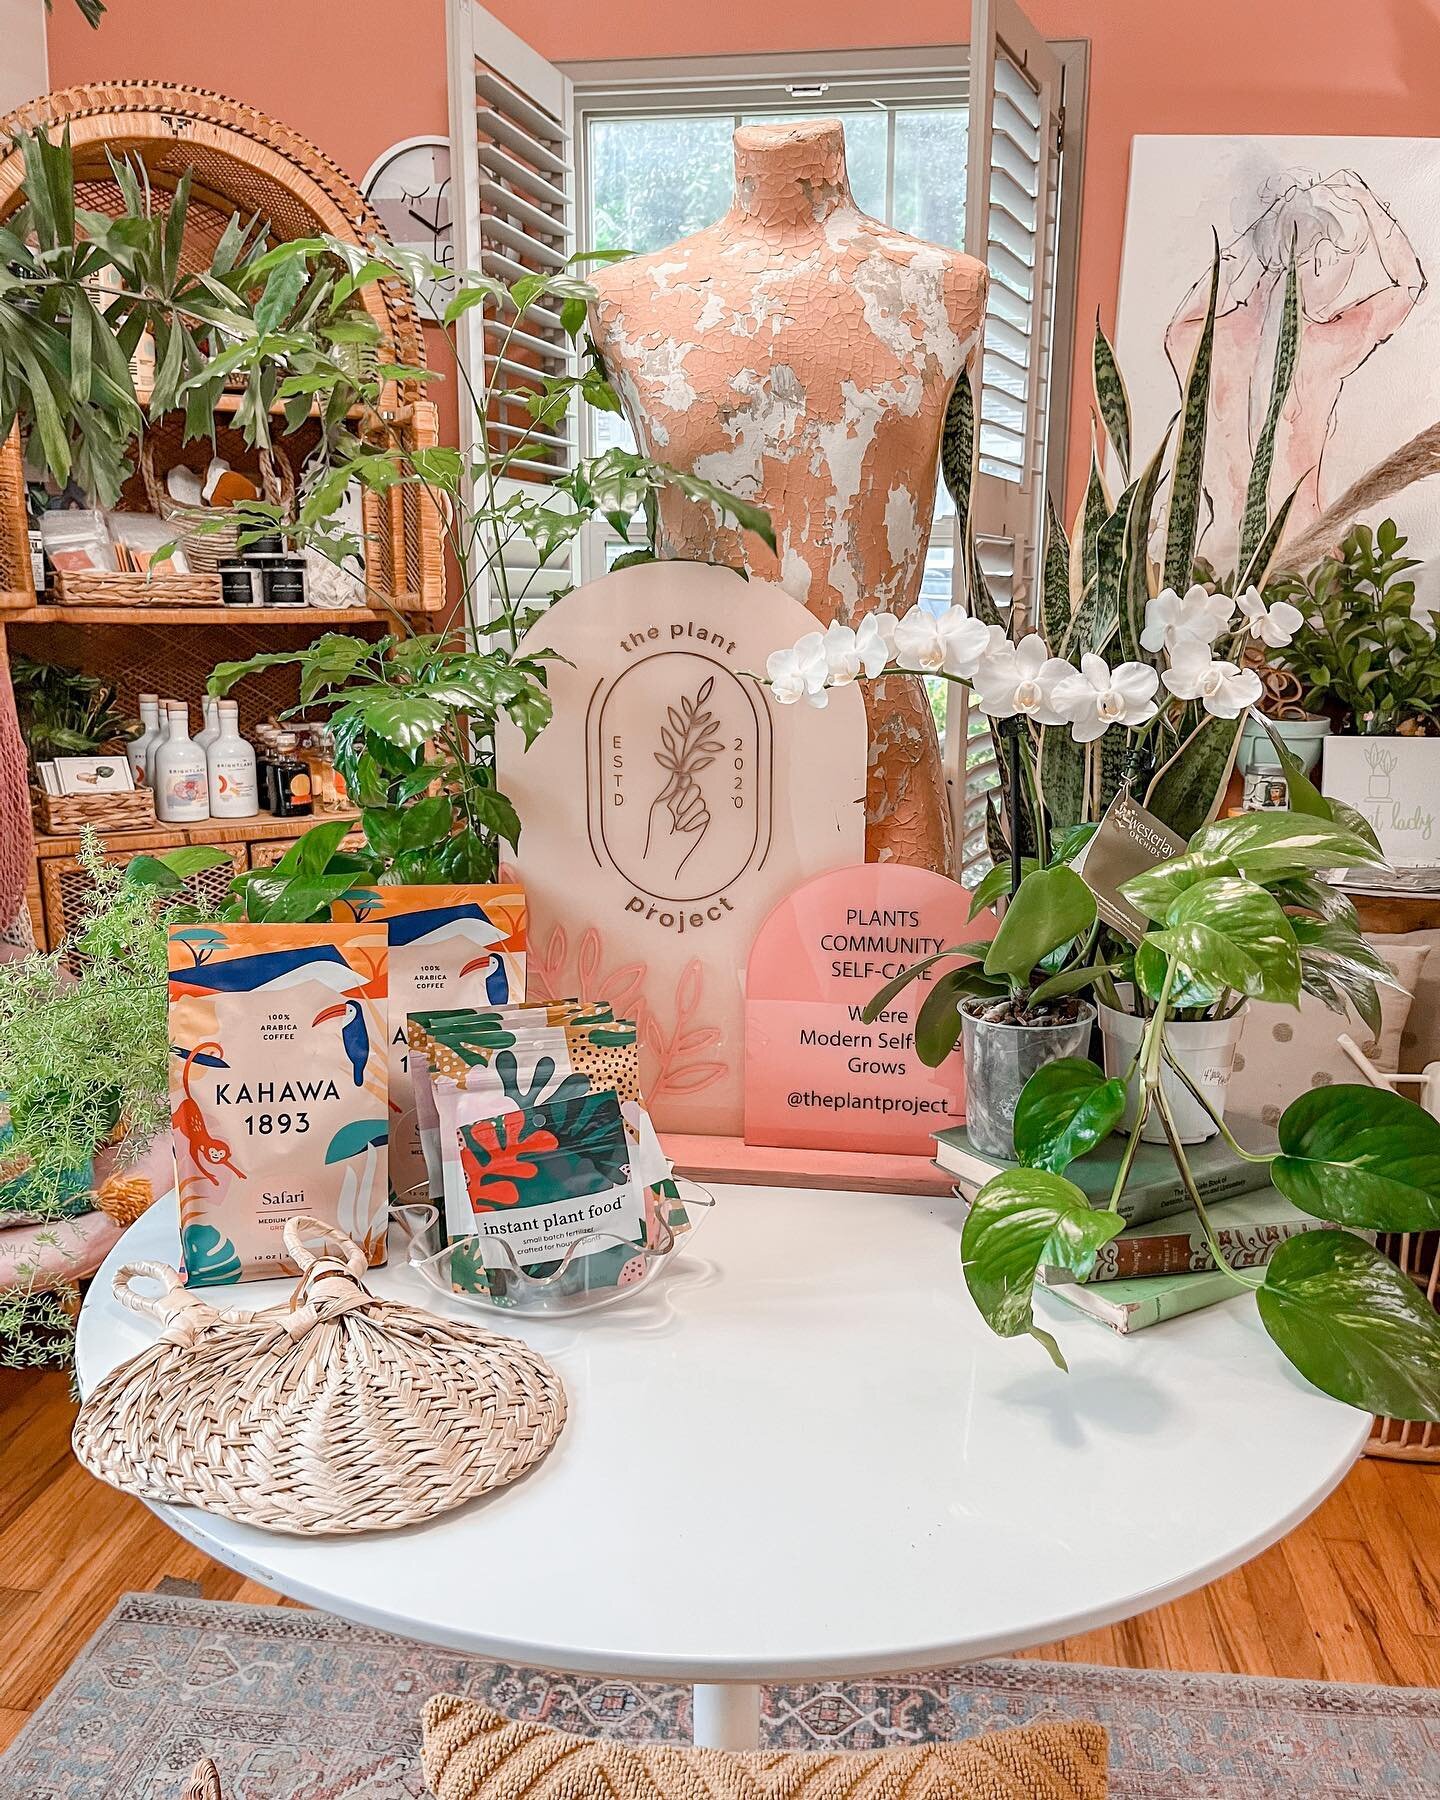 We call it a new form of #SelfCare you call us a Plant Shop&hellip;. 

Tomato&hellip;Tomahhhto either way, grab a @topochicousa and stay for a while. 
PLANTS | COMMUNITY | SELFCARE is our jam. 

See you soon!🌿

📍2310 Routh Street Dallas Tx
📍2308 R